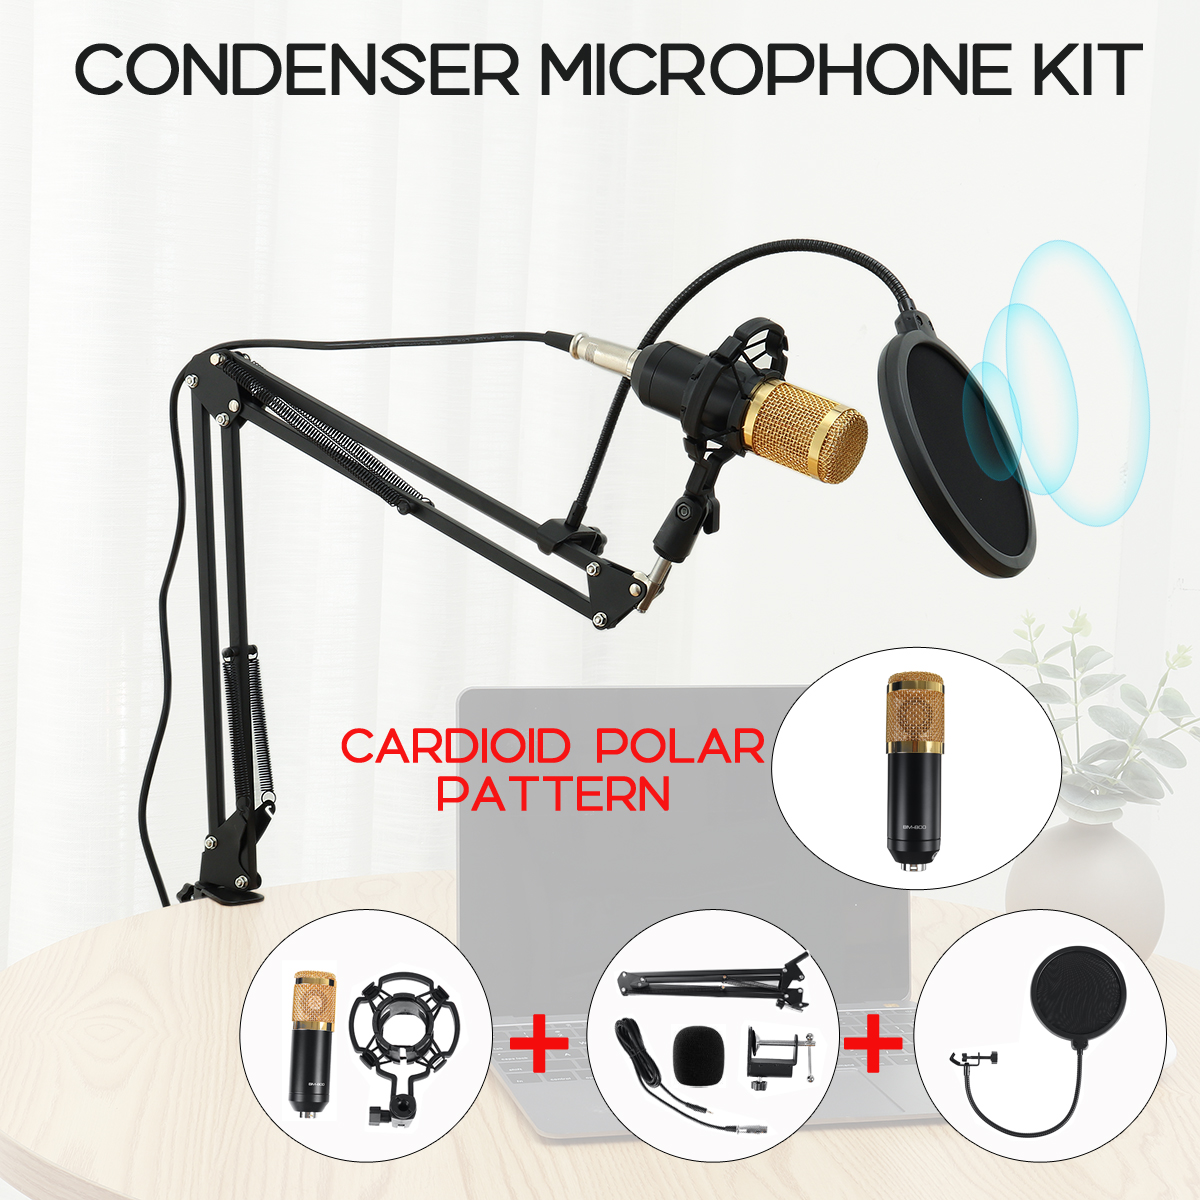 BM-800-Condenser-Microphone-Kit-35mm-Recording-Mic-Tripod-Stand-Set-for-Computer-PC-Karaoke-for-Chat-1736977-2